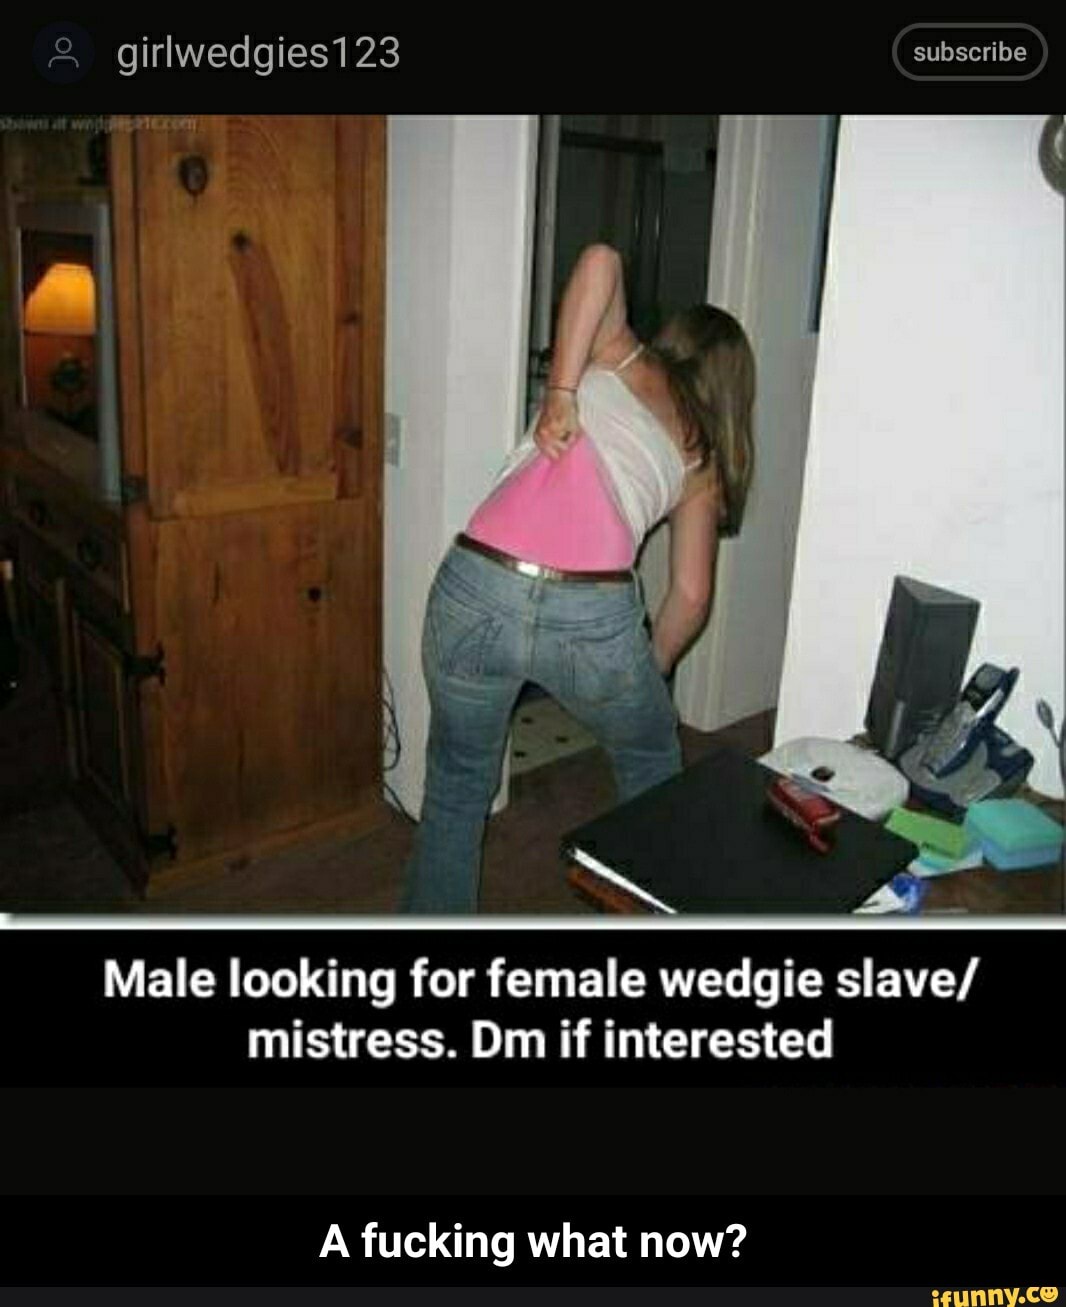 Female wedgie slave/mistress wanted. Dm or leave kik in comments - Female  wedgie slave/mistress wanted. Dm or leave kik in comments - iFunny